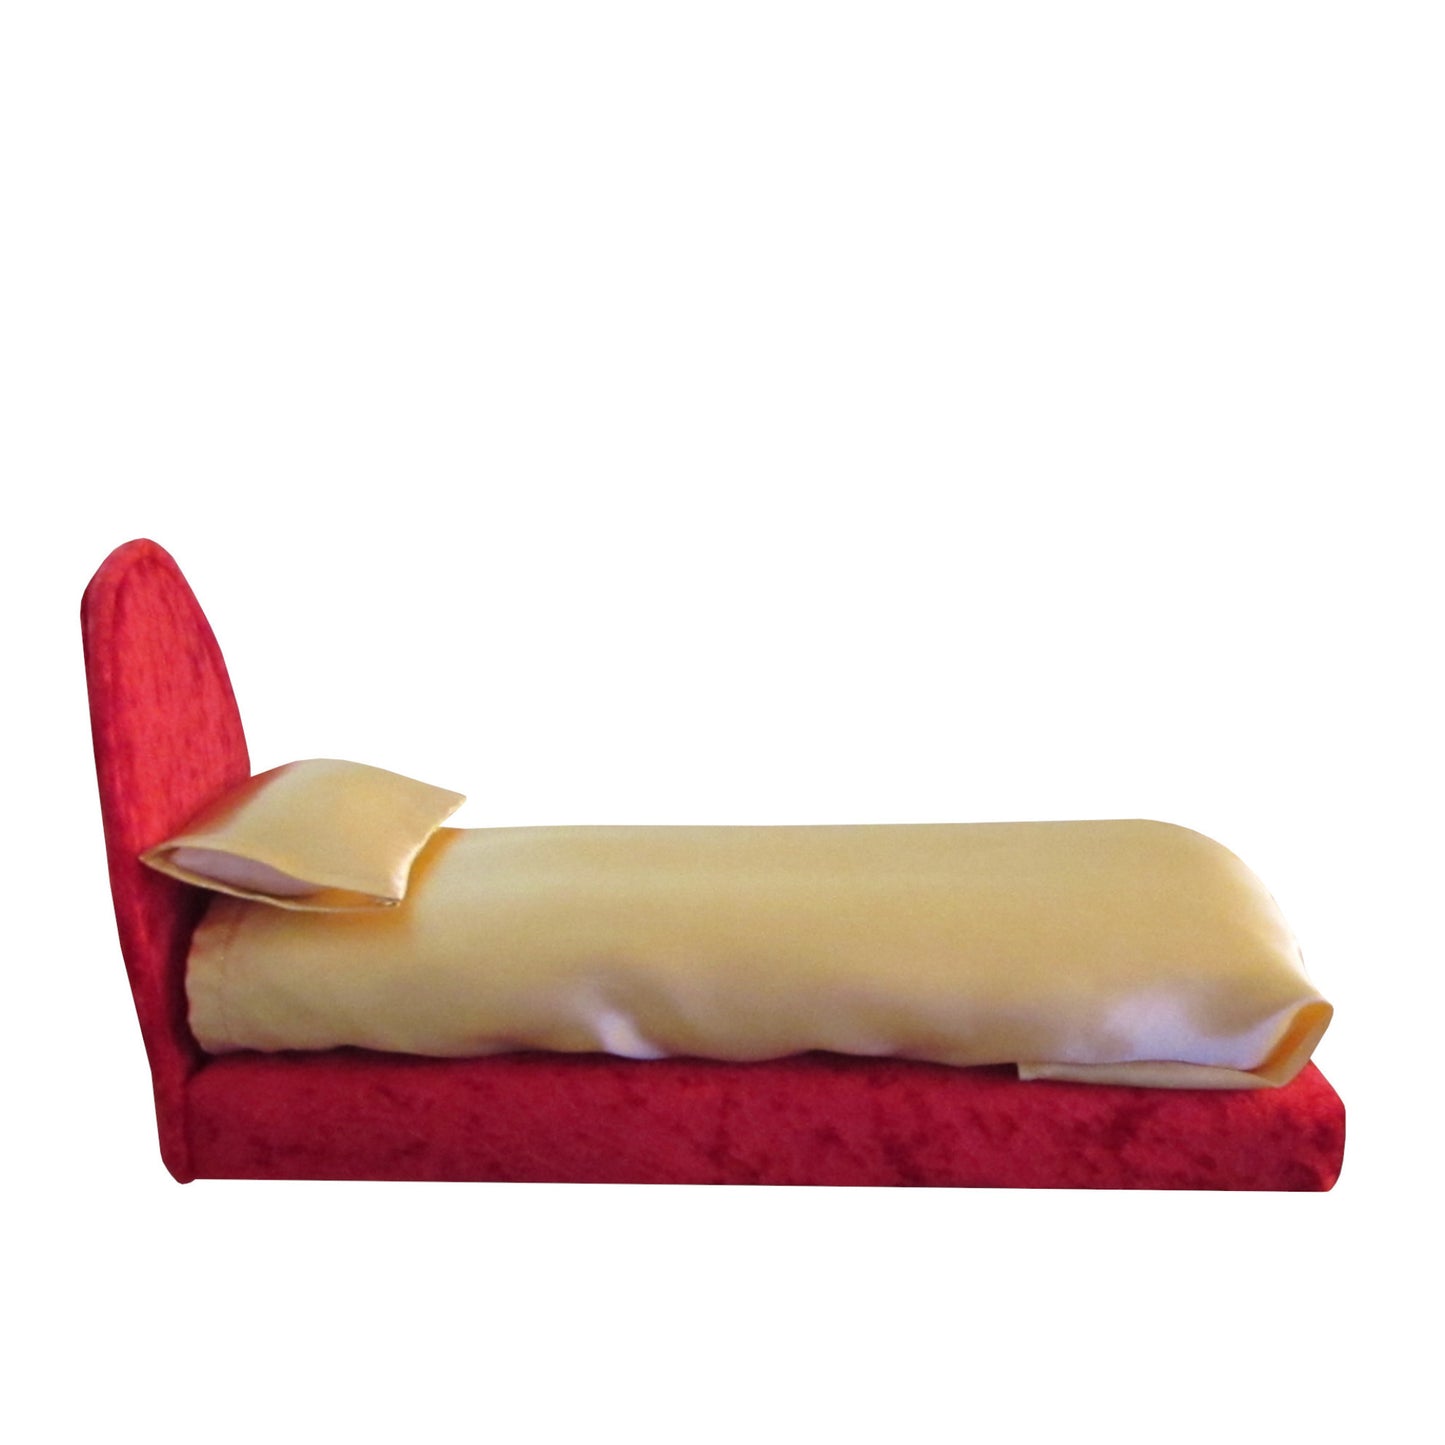 Gold Satin Fitted, Flat Sheet, and Pillowcase with Red Crushed Velvet Doll Bed for 11.5-inch and 12-inch dolls Side view